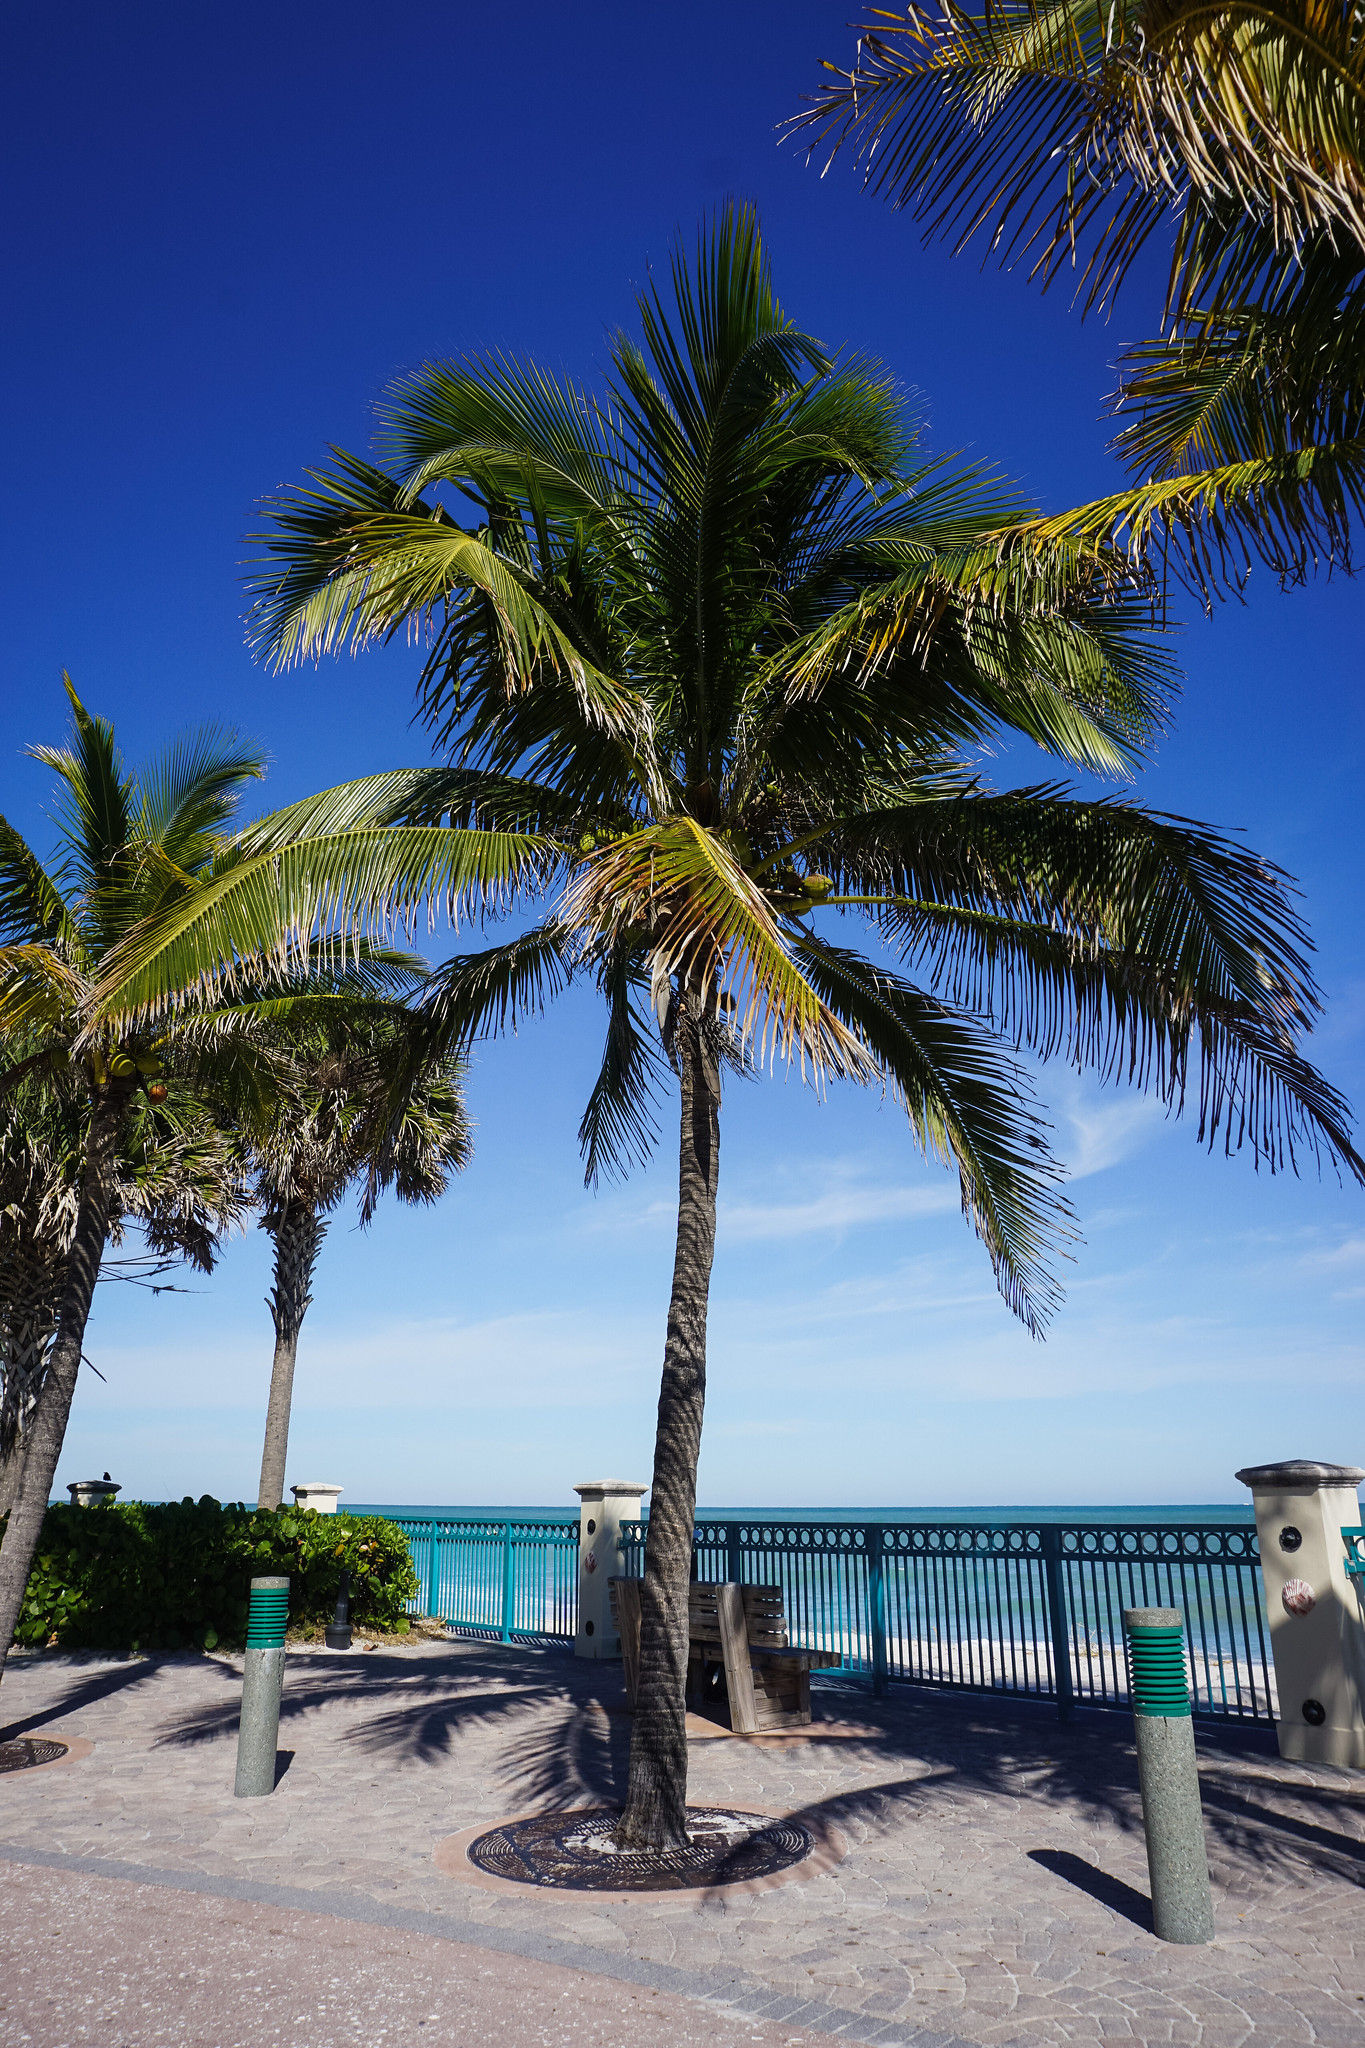 Best Things to Do in Vero Beach, Florida | Ultimate Travel Guide Vero Beach, FL | What to do in Vero Beach | Best Restaurants Vero Beach | What to Eat in Vero Beach Florida | Visit Indian River County Florida | Treasure Coast Travel Guide | Southern Florida Vacation